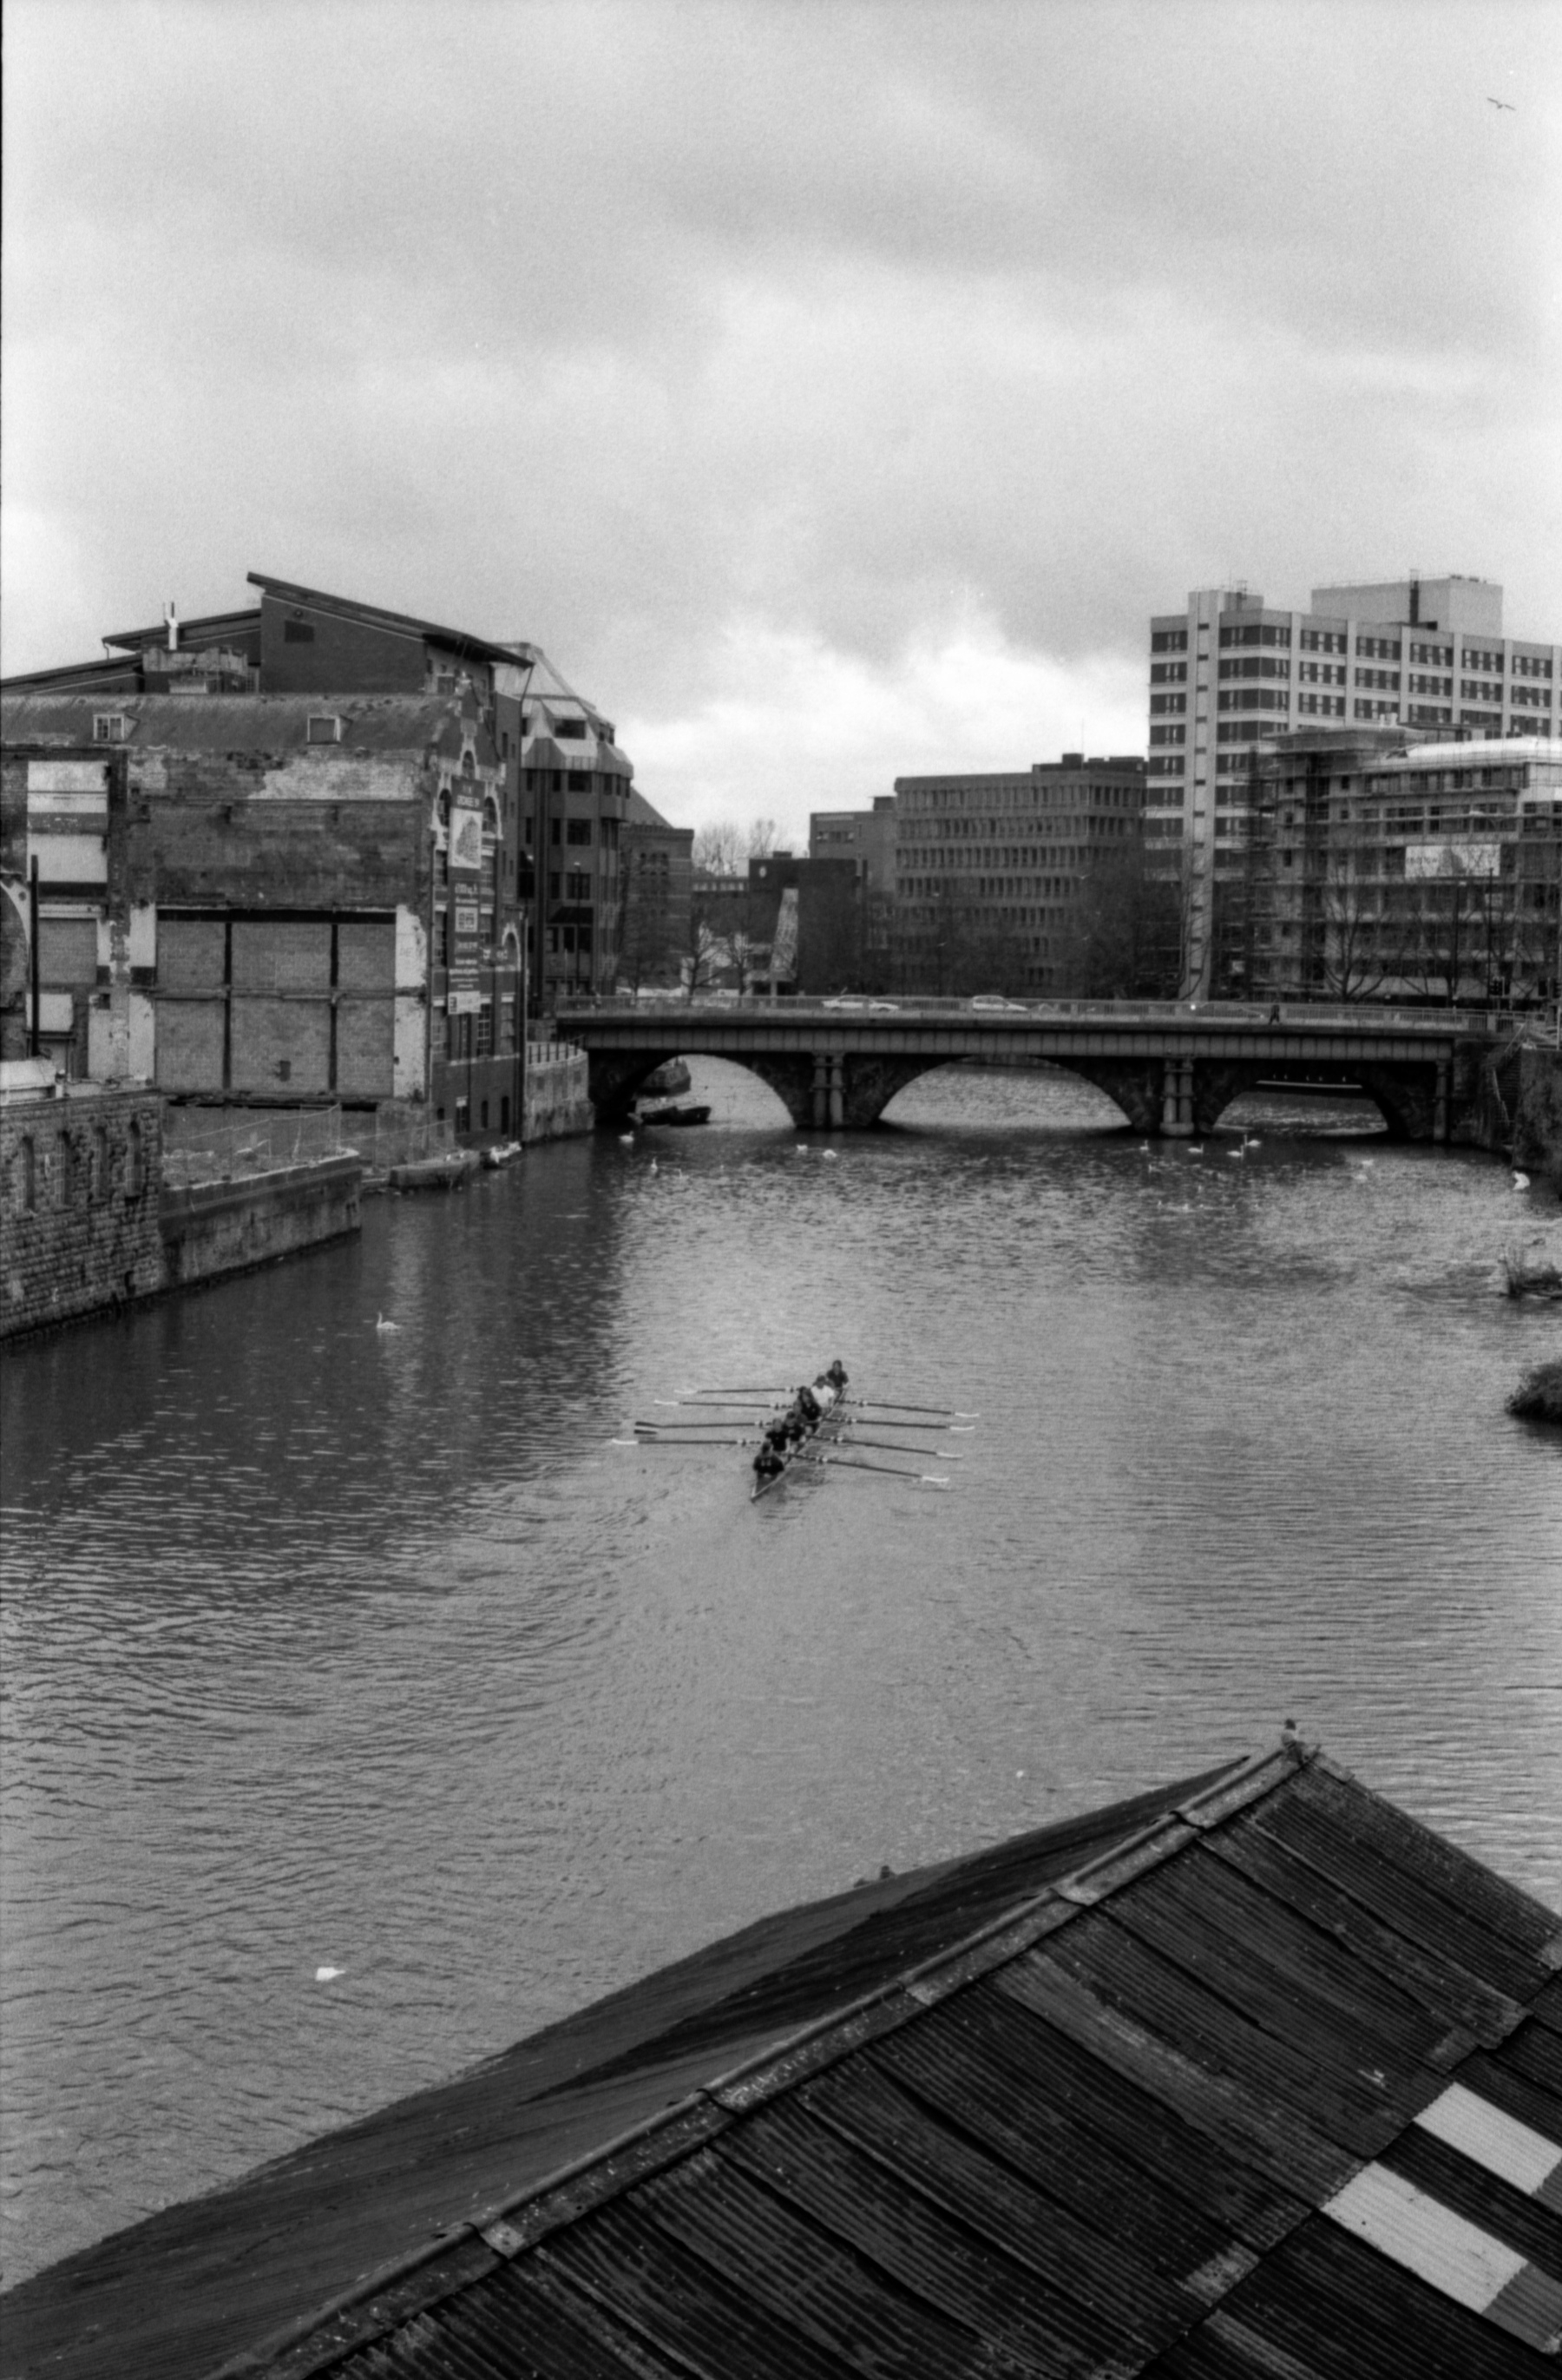 Competitive rowers practice on the river Avon in Bristol